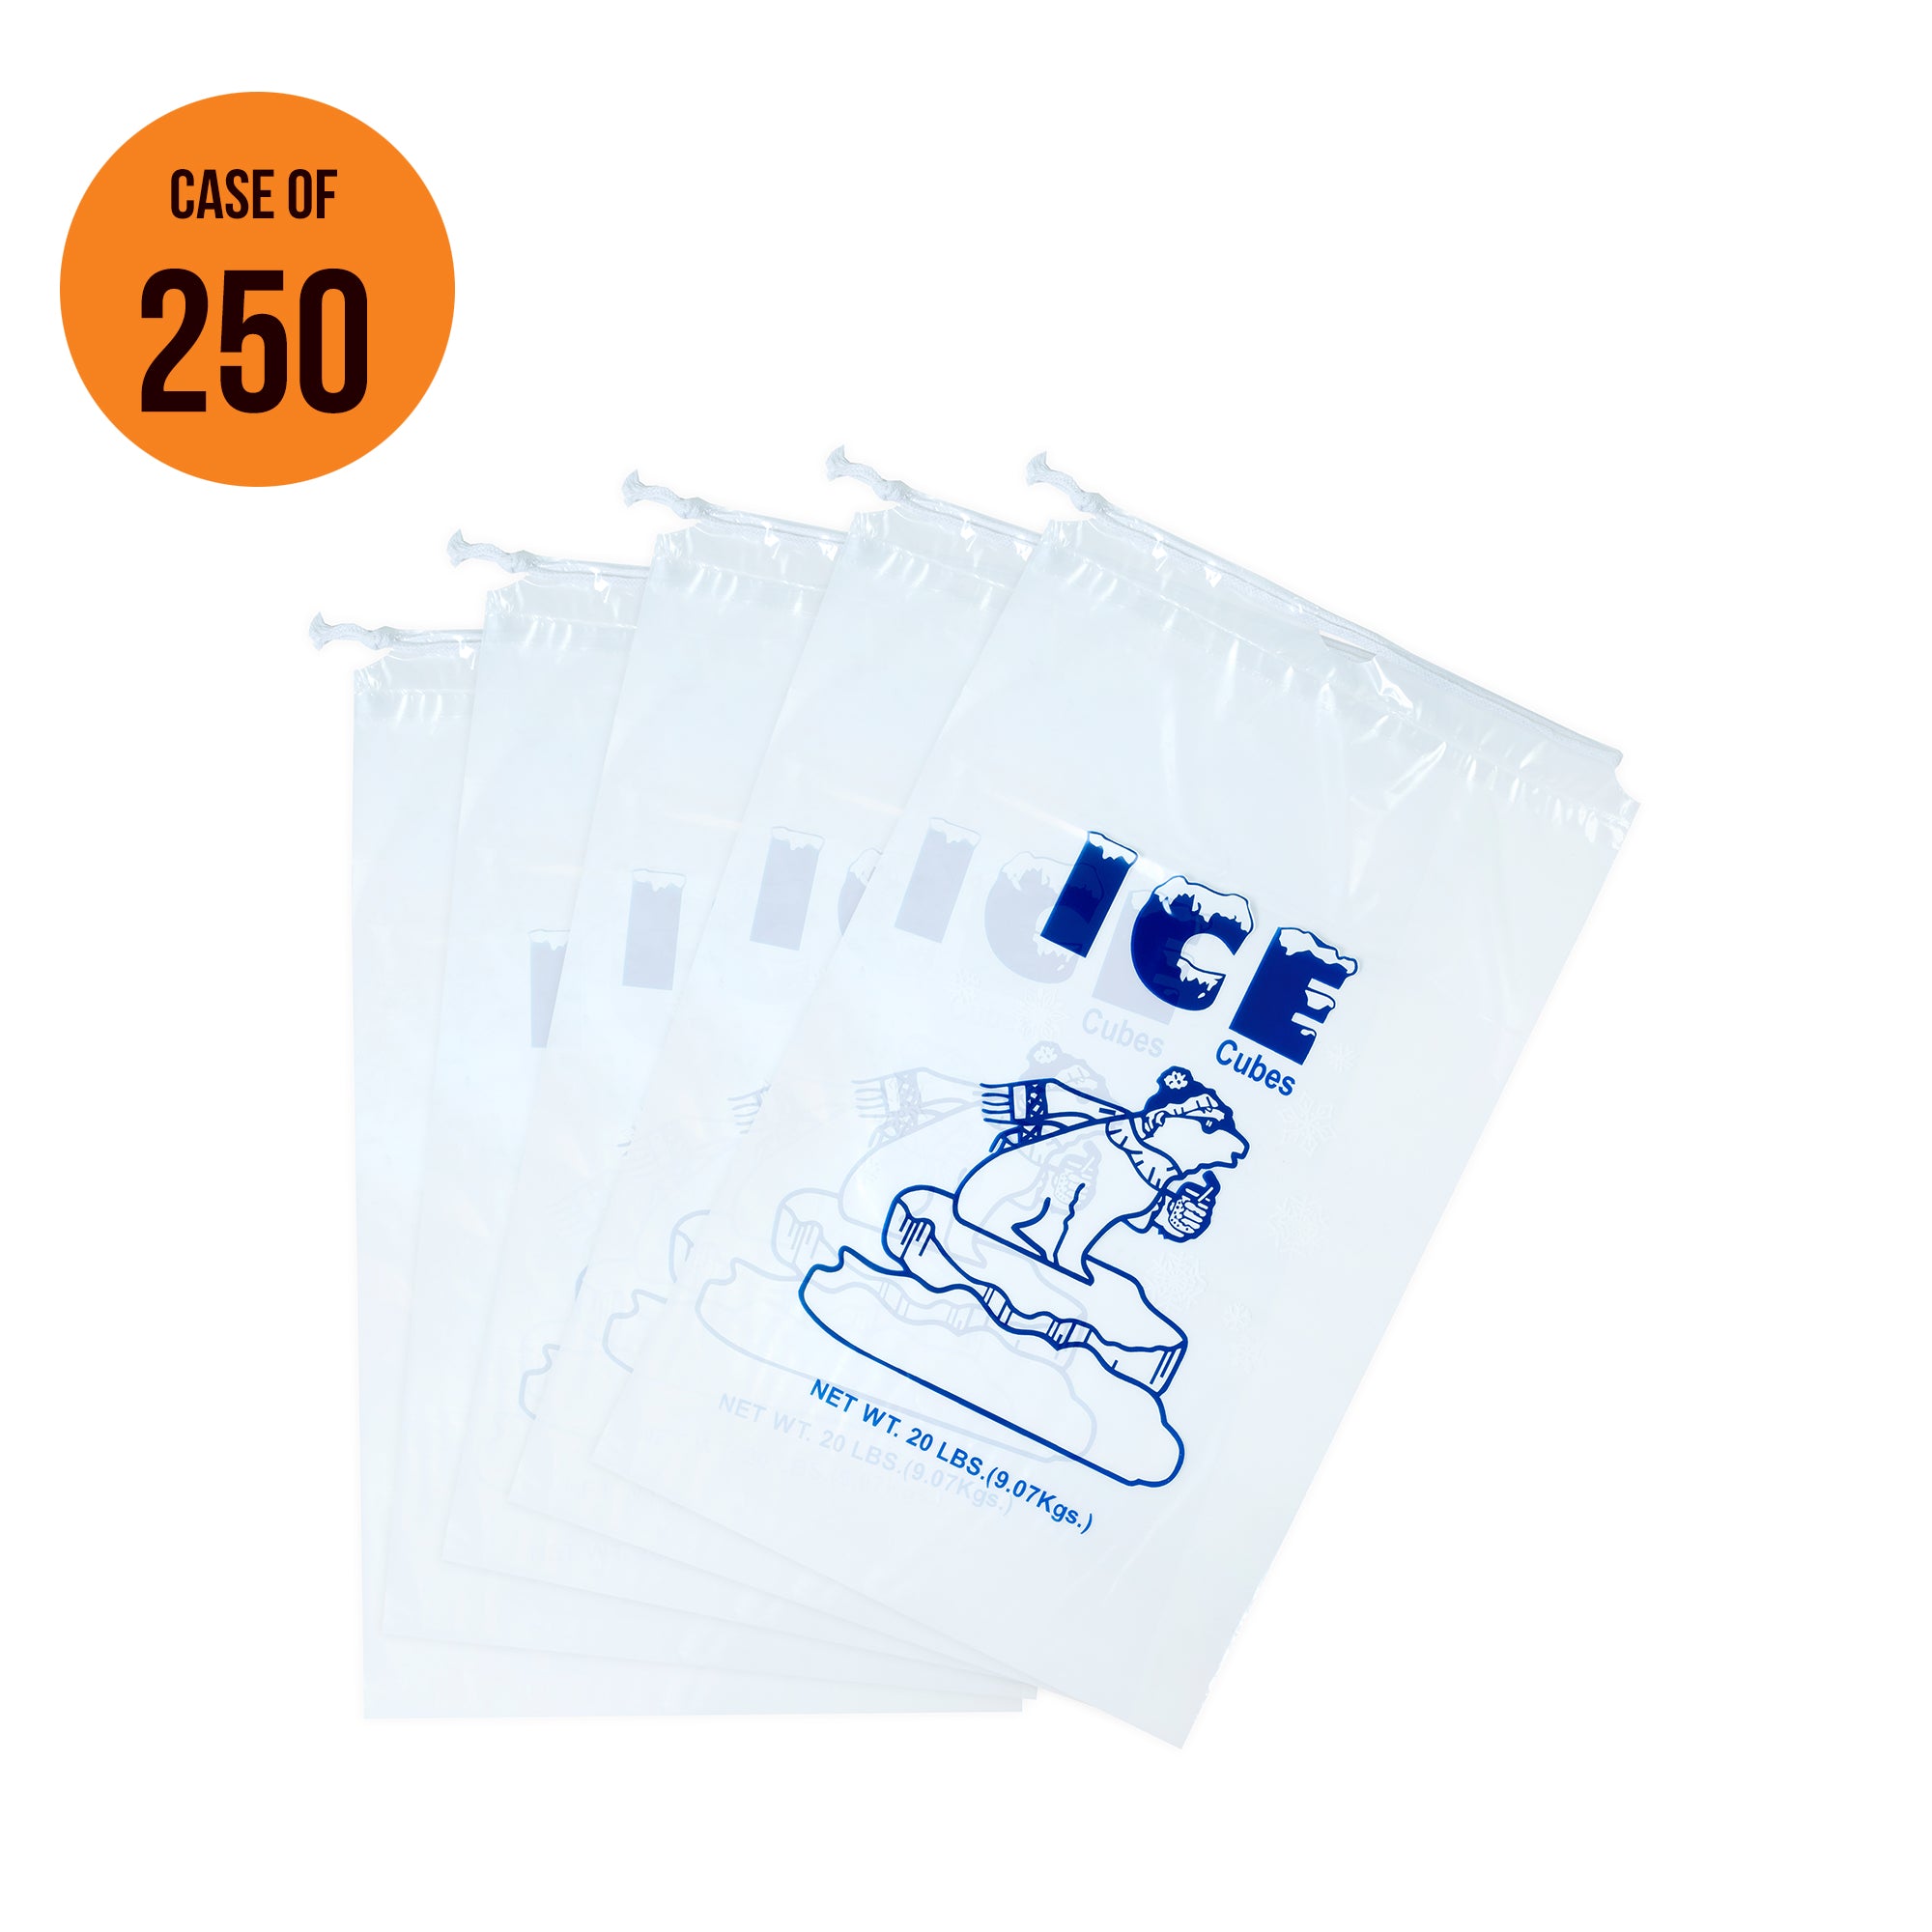 20 Lbs Ice Bags (Pack of 250) with Cotton Drawstring - Infinite Pack